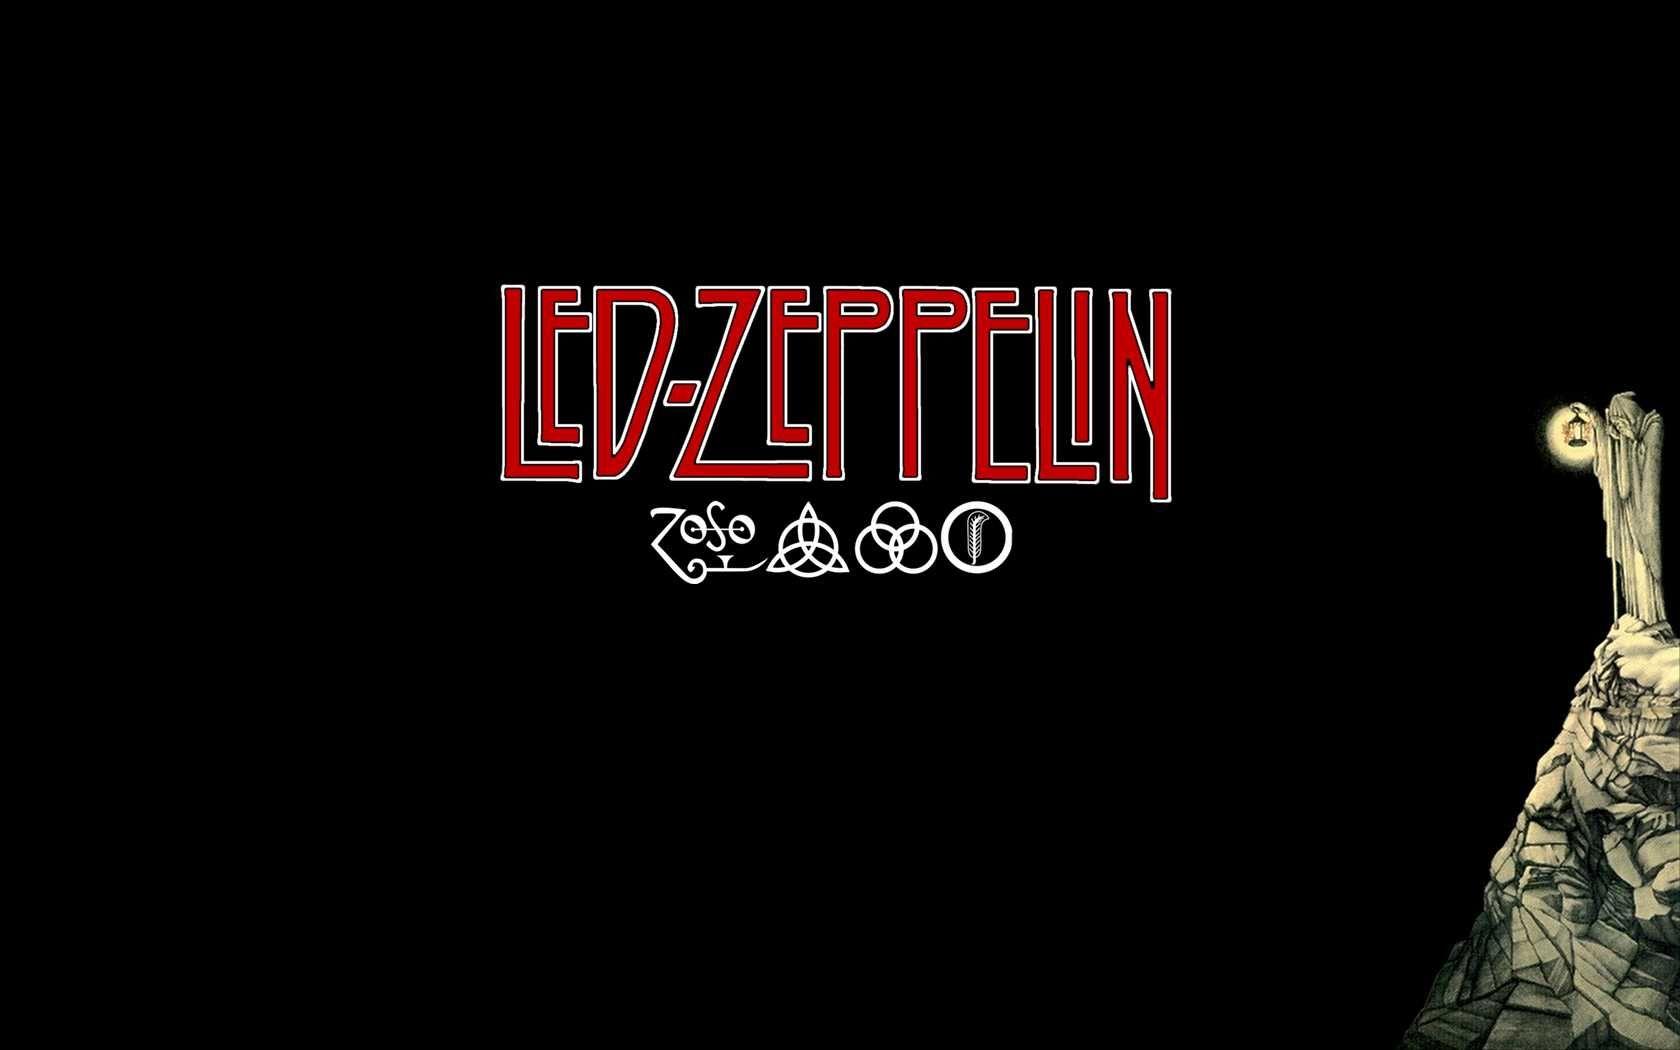 Widescreen Of Led Zeppelin Wallpaper And Background Image Full HD